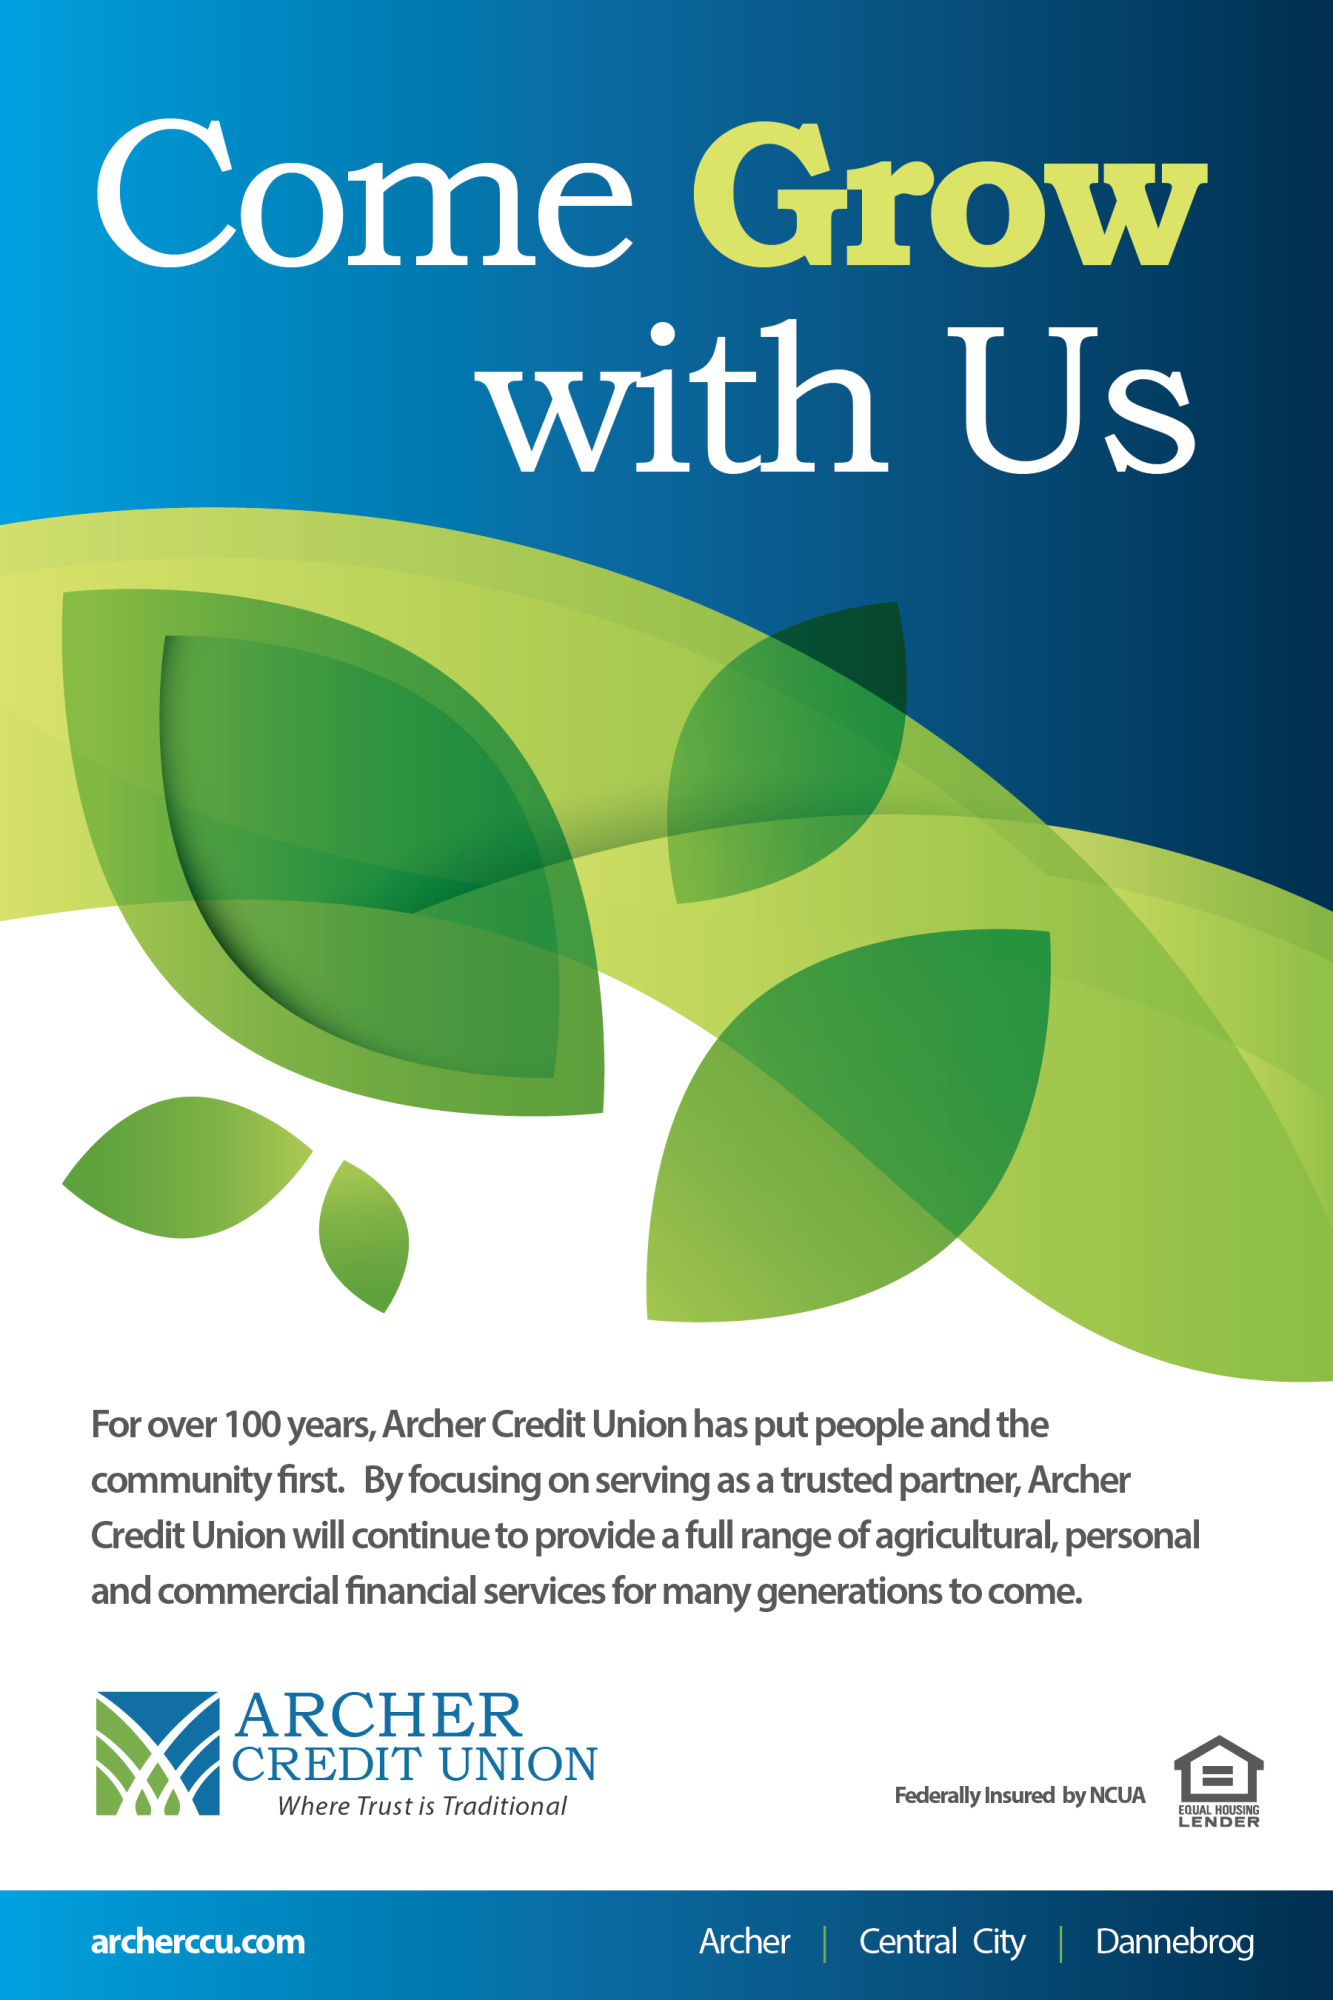 archer credit union poster design 3 come grow with us